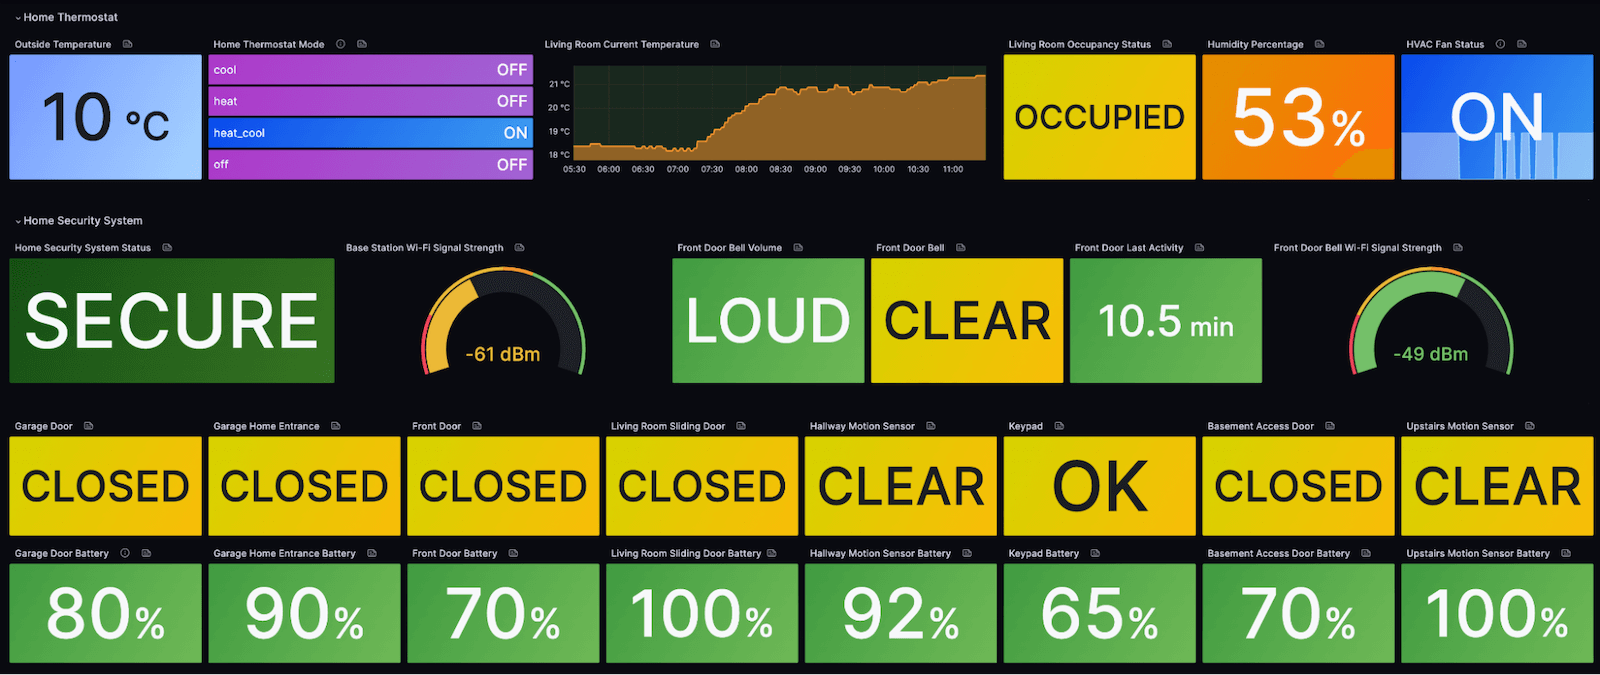 A screenshot of a Grafana dashboard showing temperature, humidity levels, occupancy and HVAC fan status, and stats for a home security system.